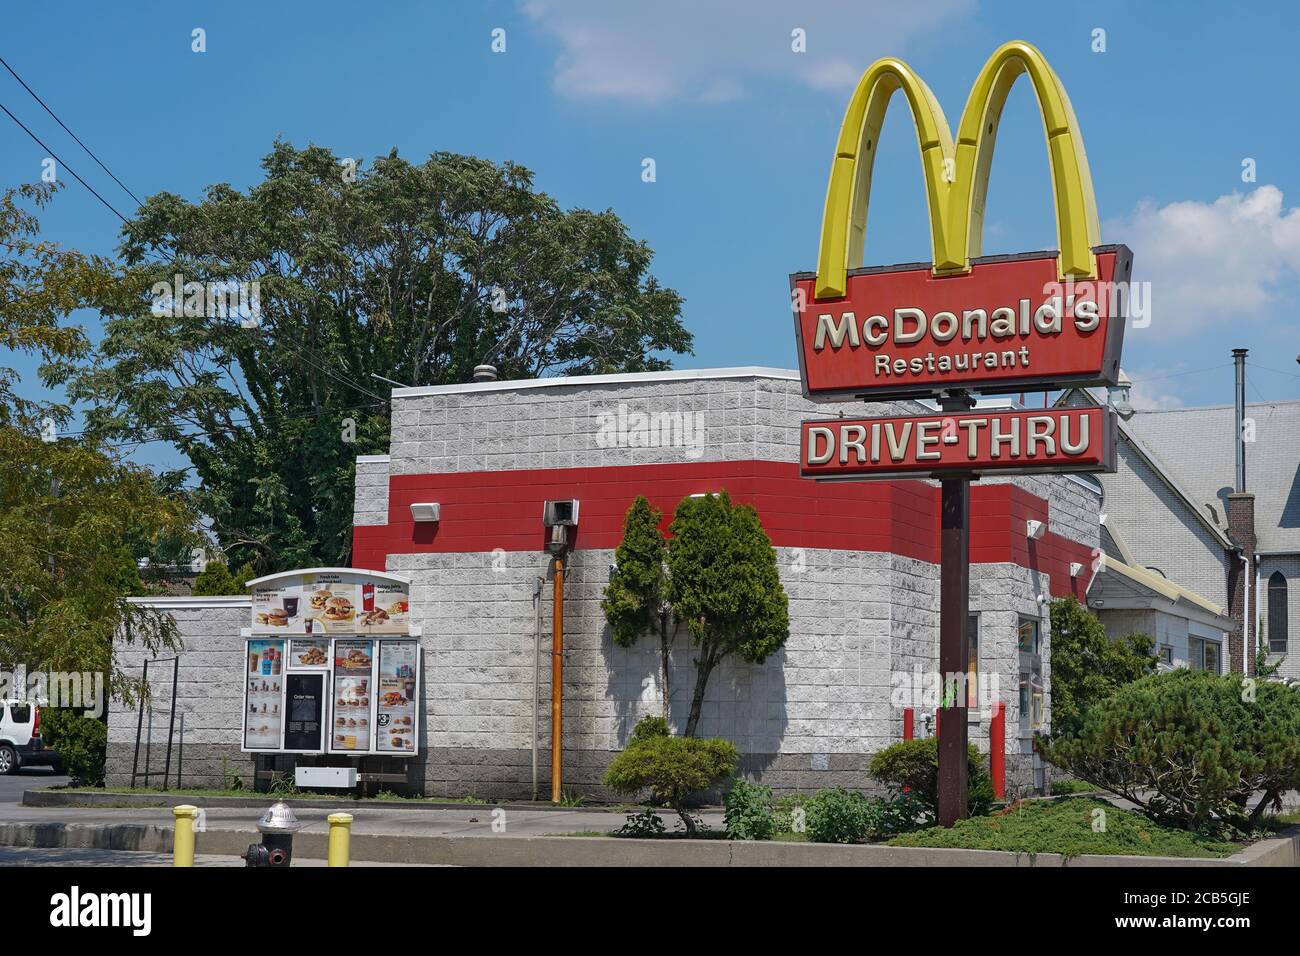 A view of McDonald's Restaurant in Queens Borough of New York City. McDonald's plans to hire 260,000 people this summer in the United States as  it begins to resume normal operations. McDonald's is